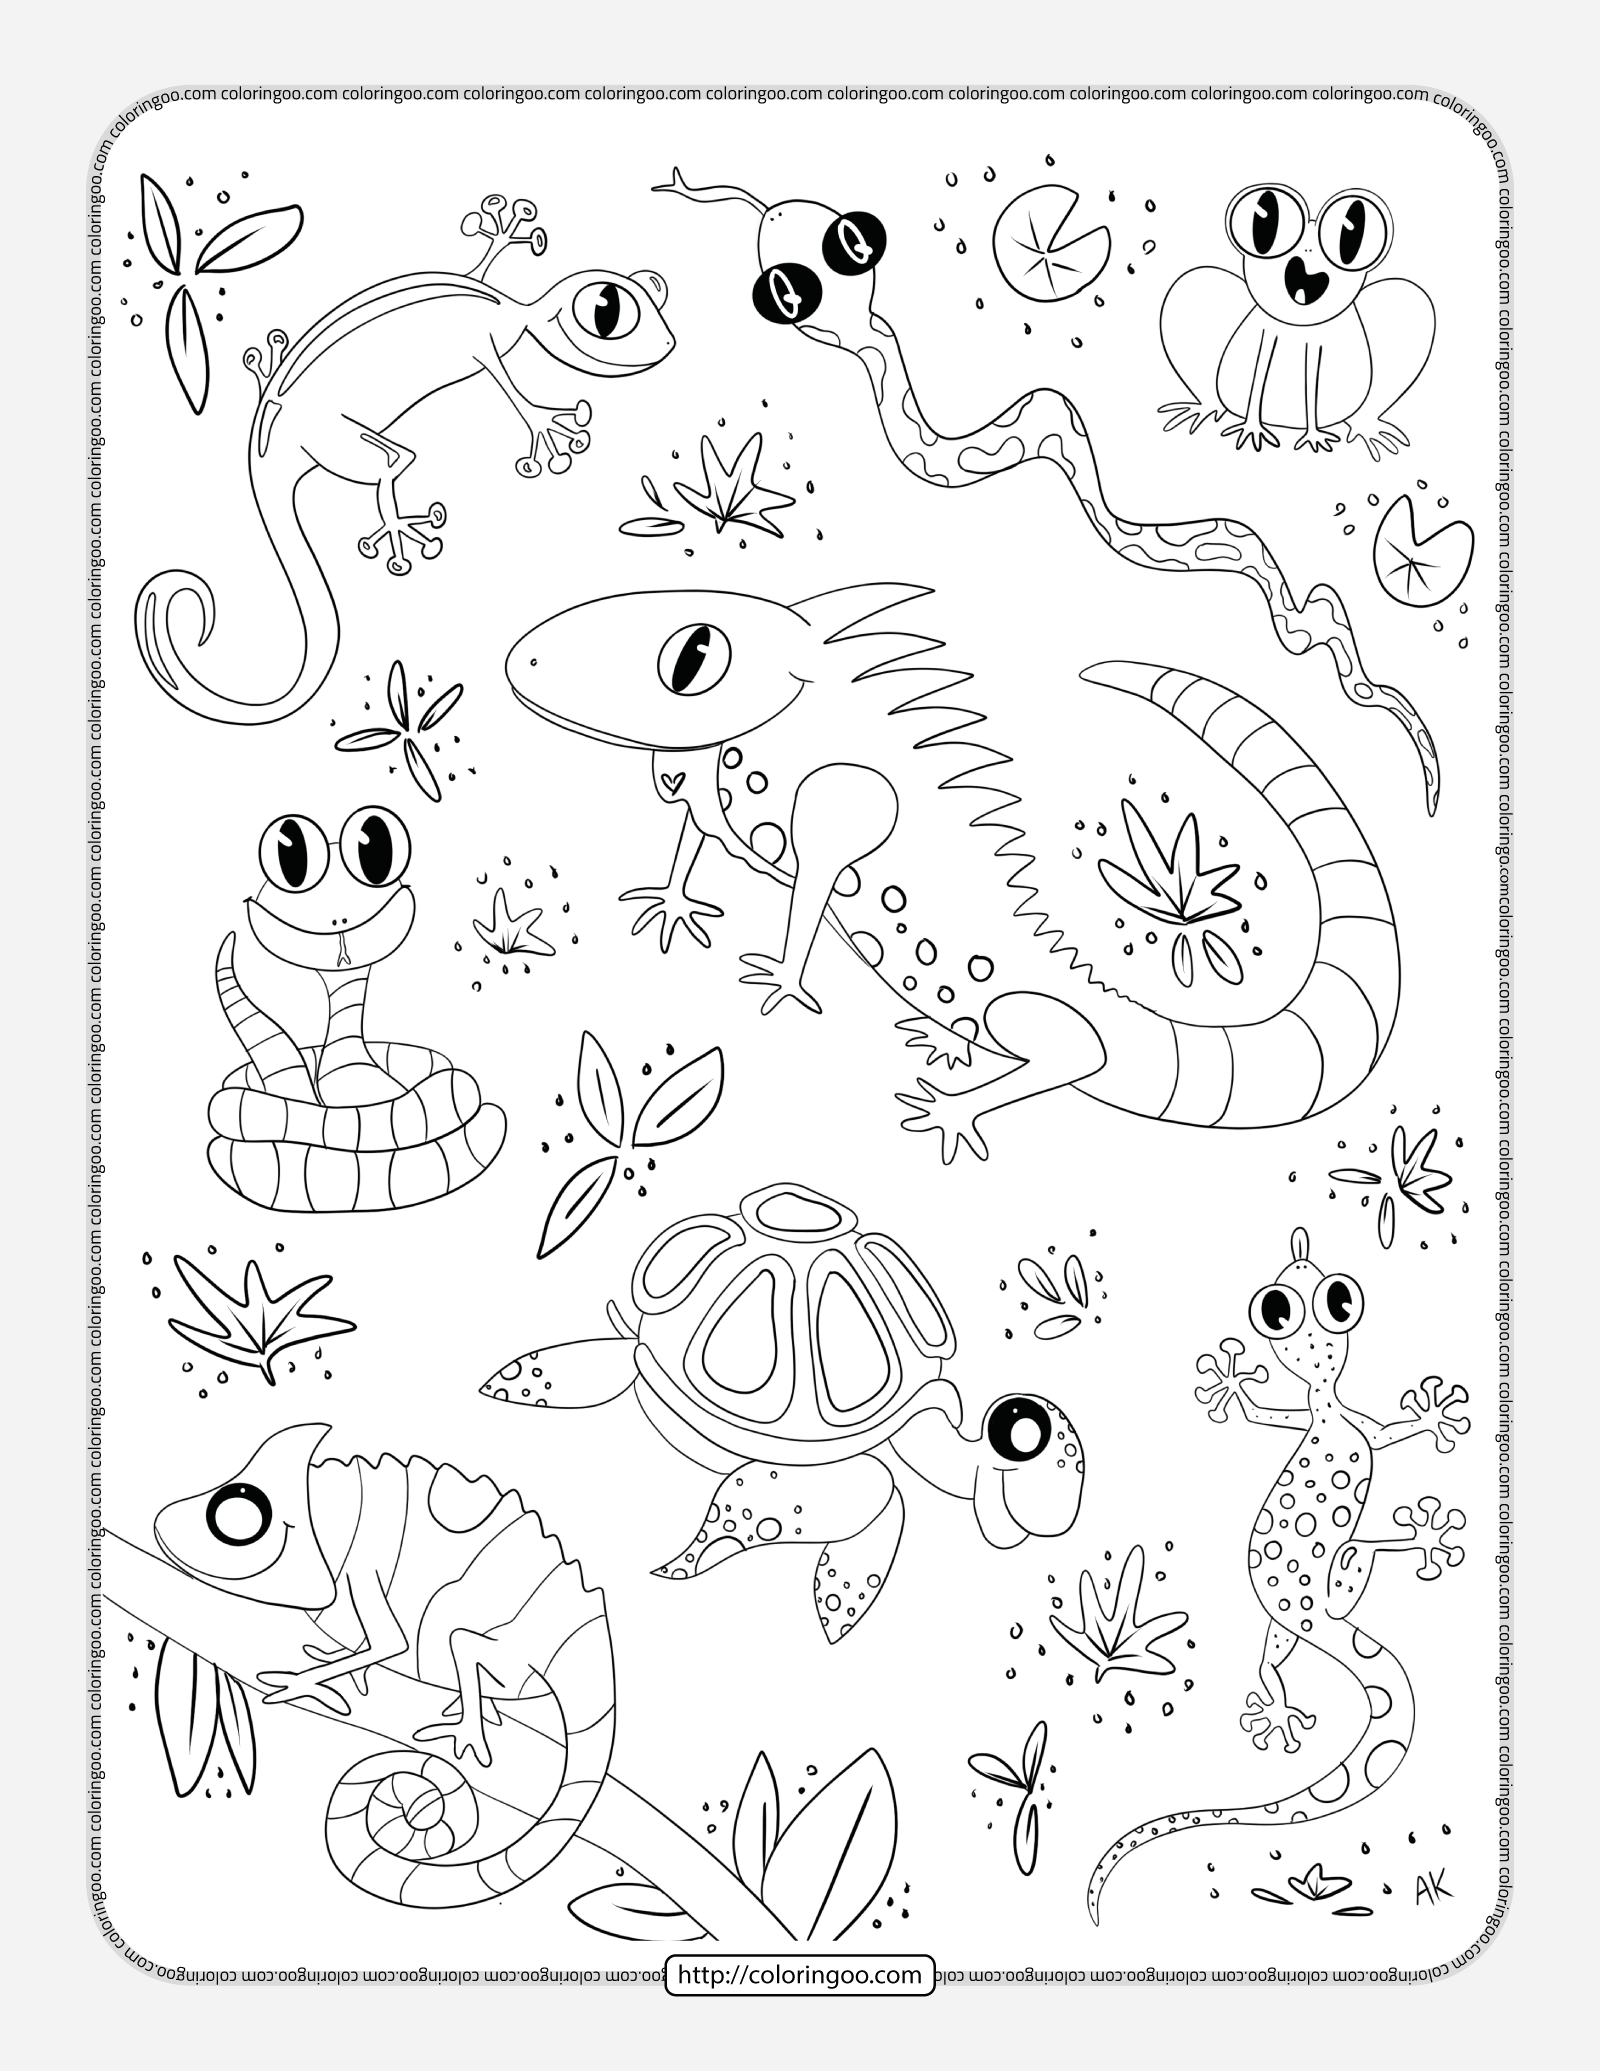 reptiles doodle pdf coloring page